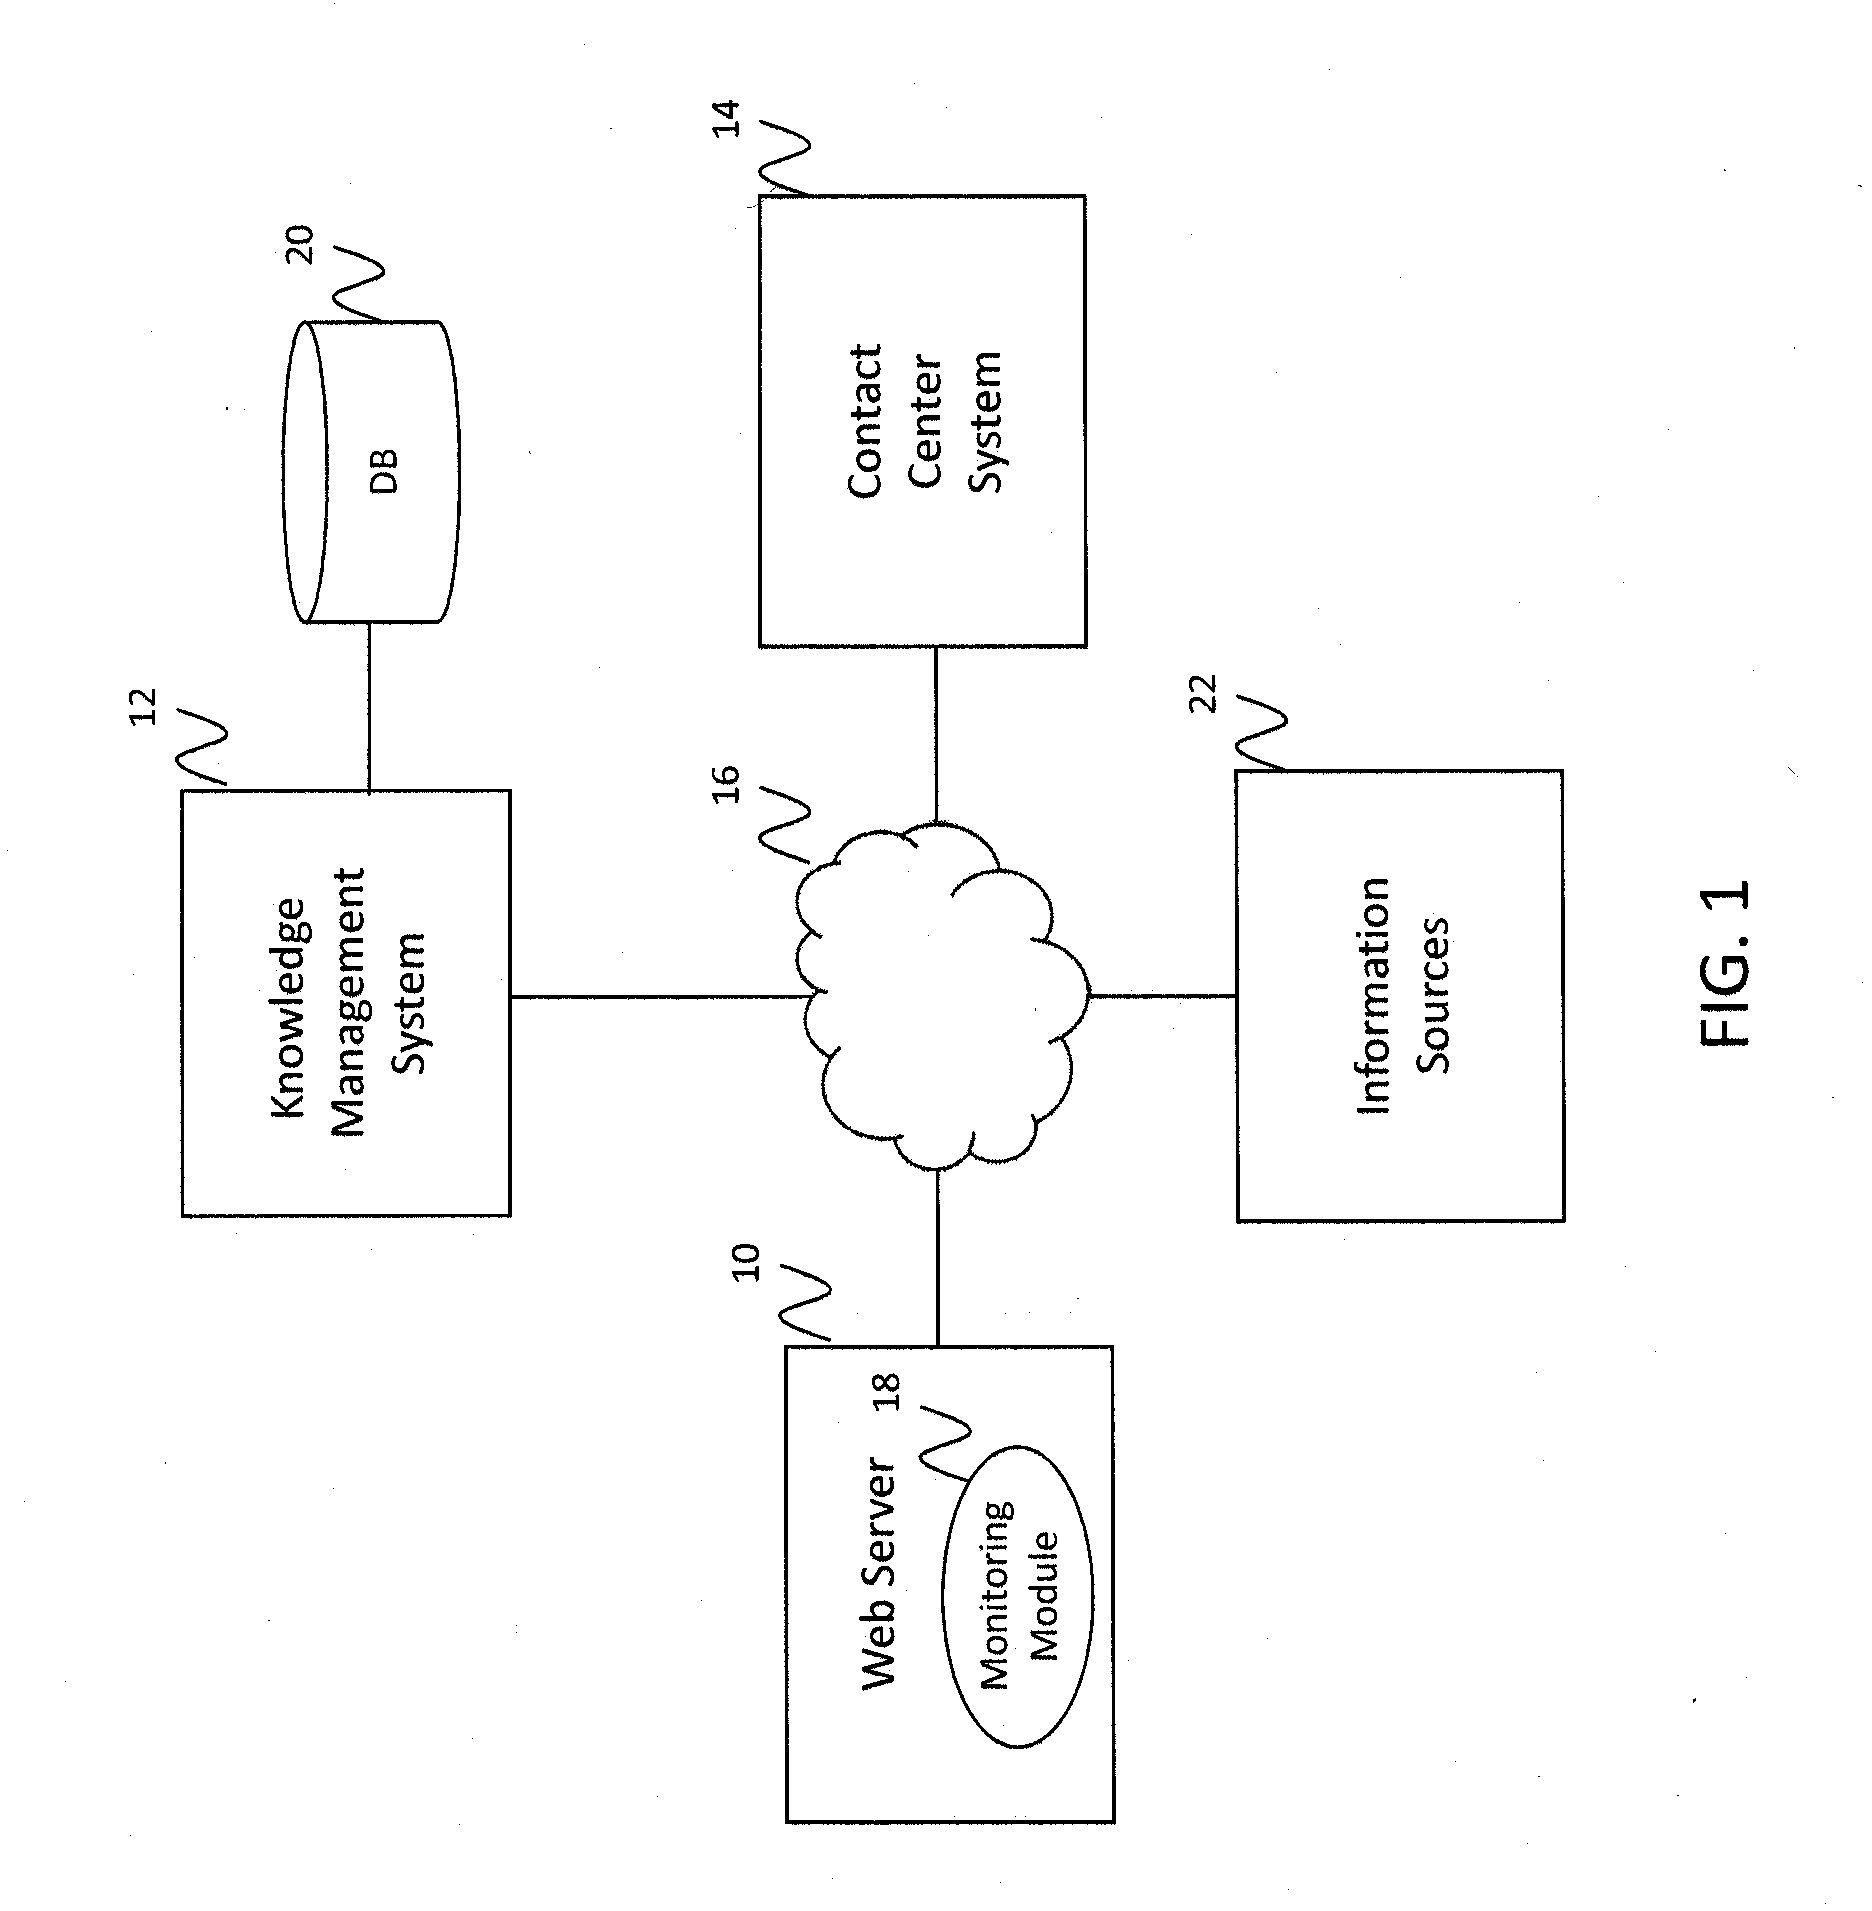 System and method for making engagement offers based on observed navigation path